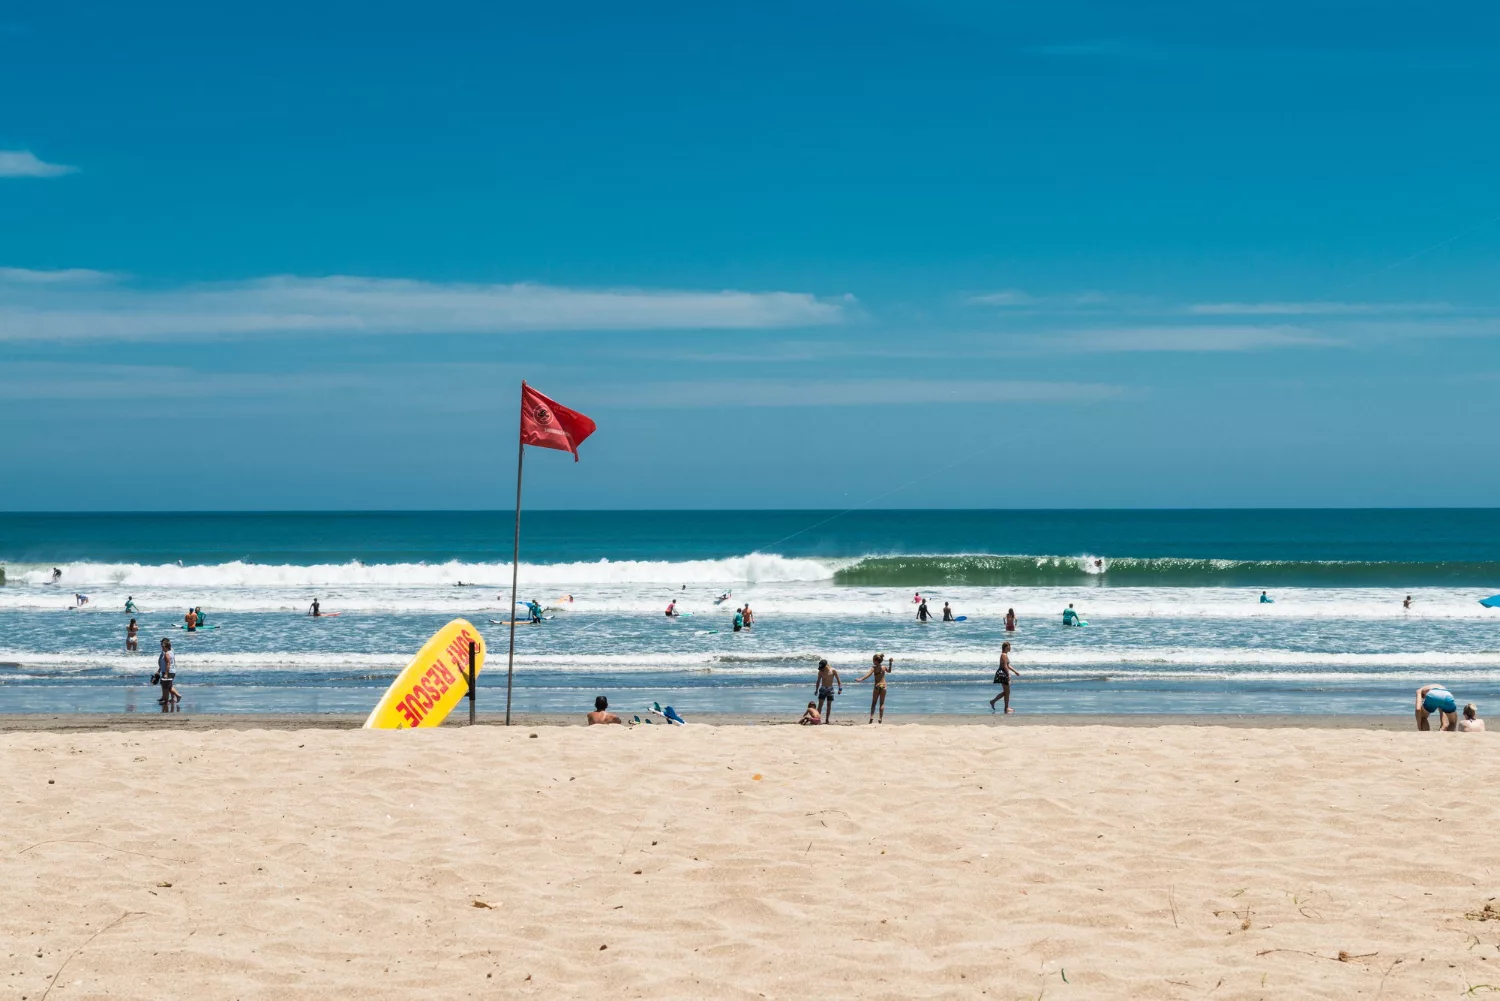 Things to Do in Bali - Surfing at Kuta Beach